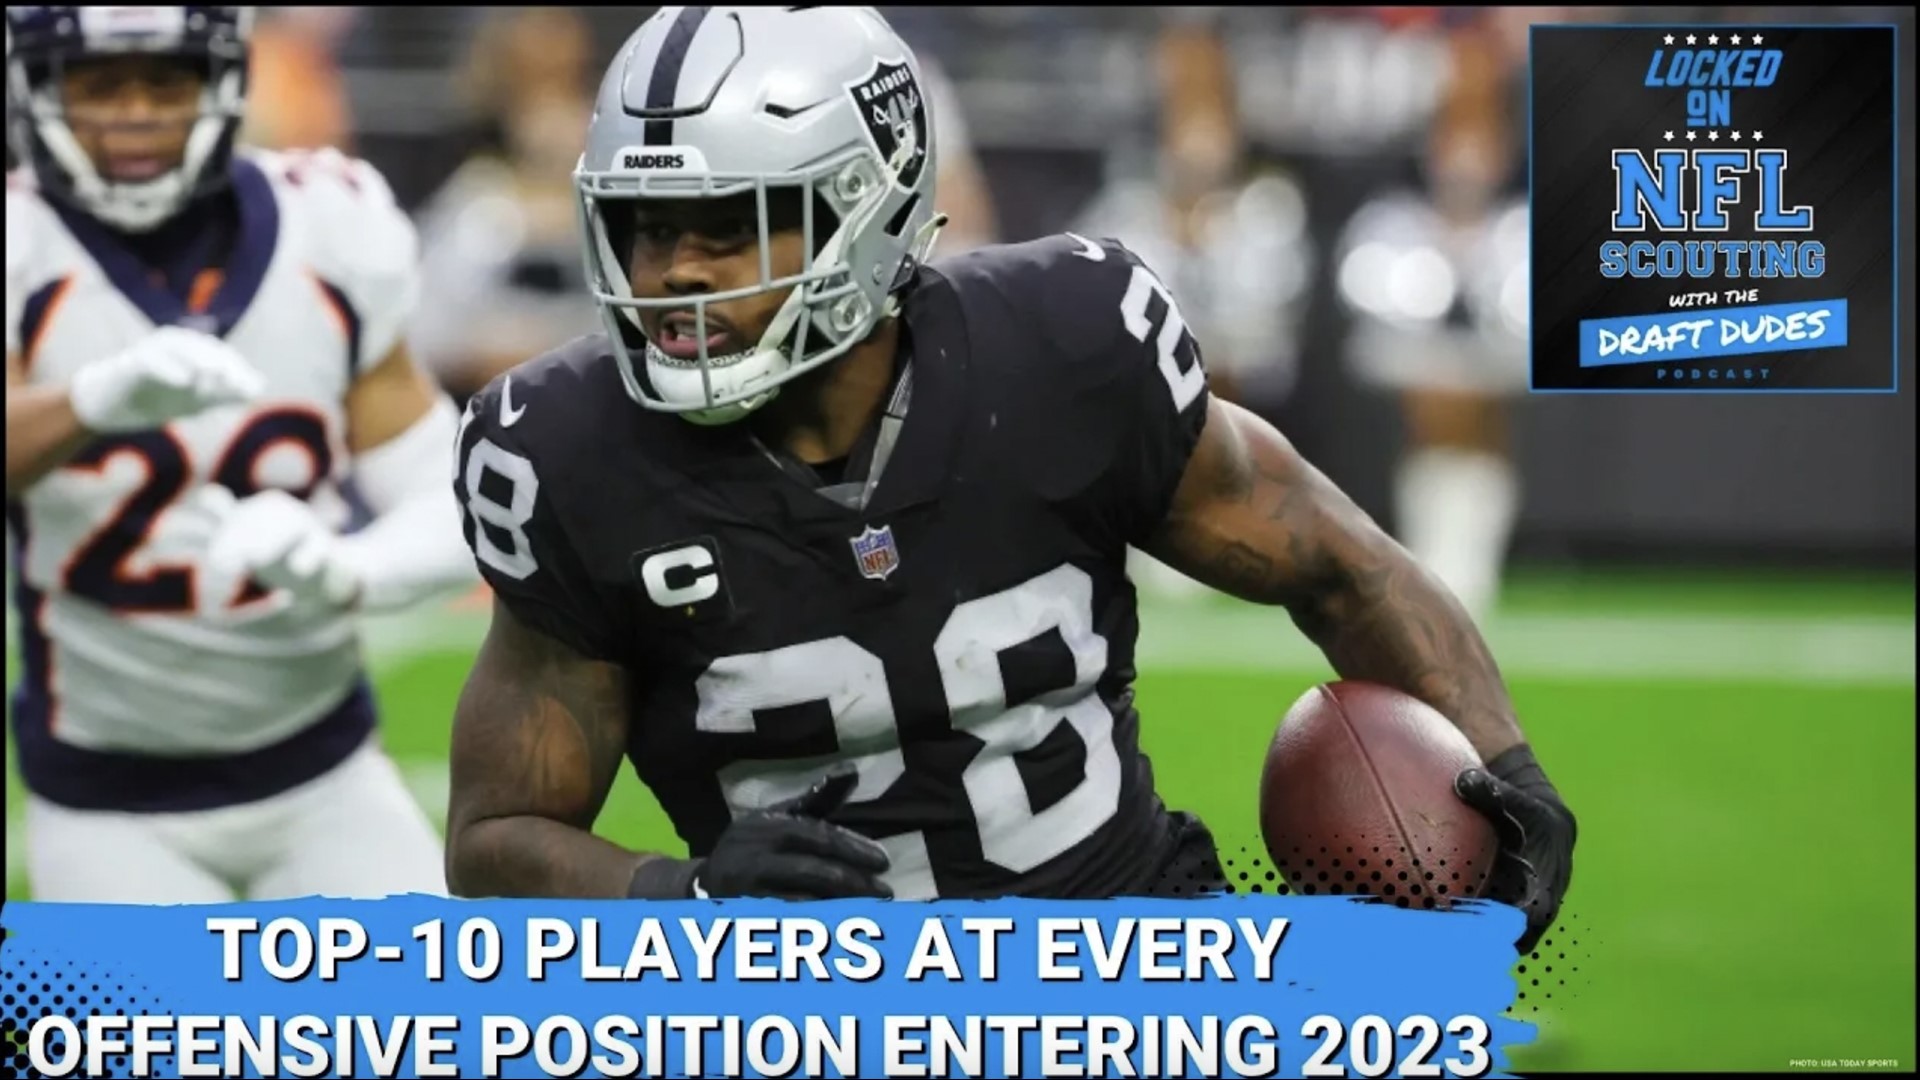 Ranking the top-10 NFL players at every offensive position entering 2023